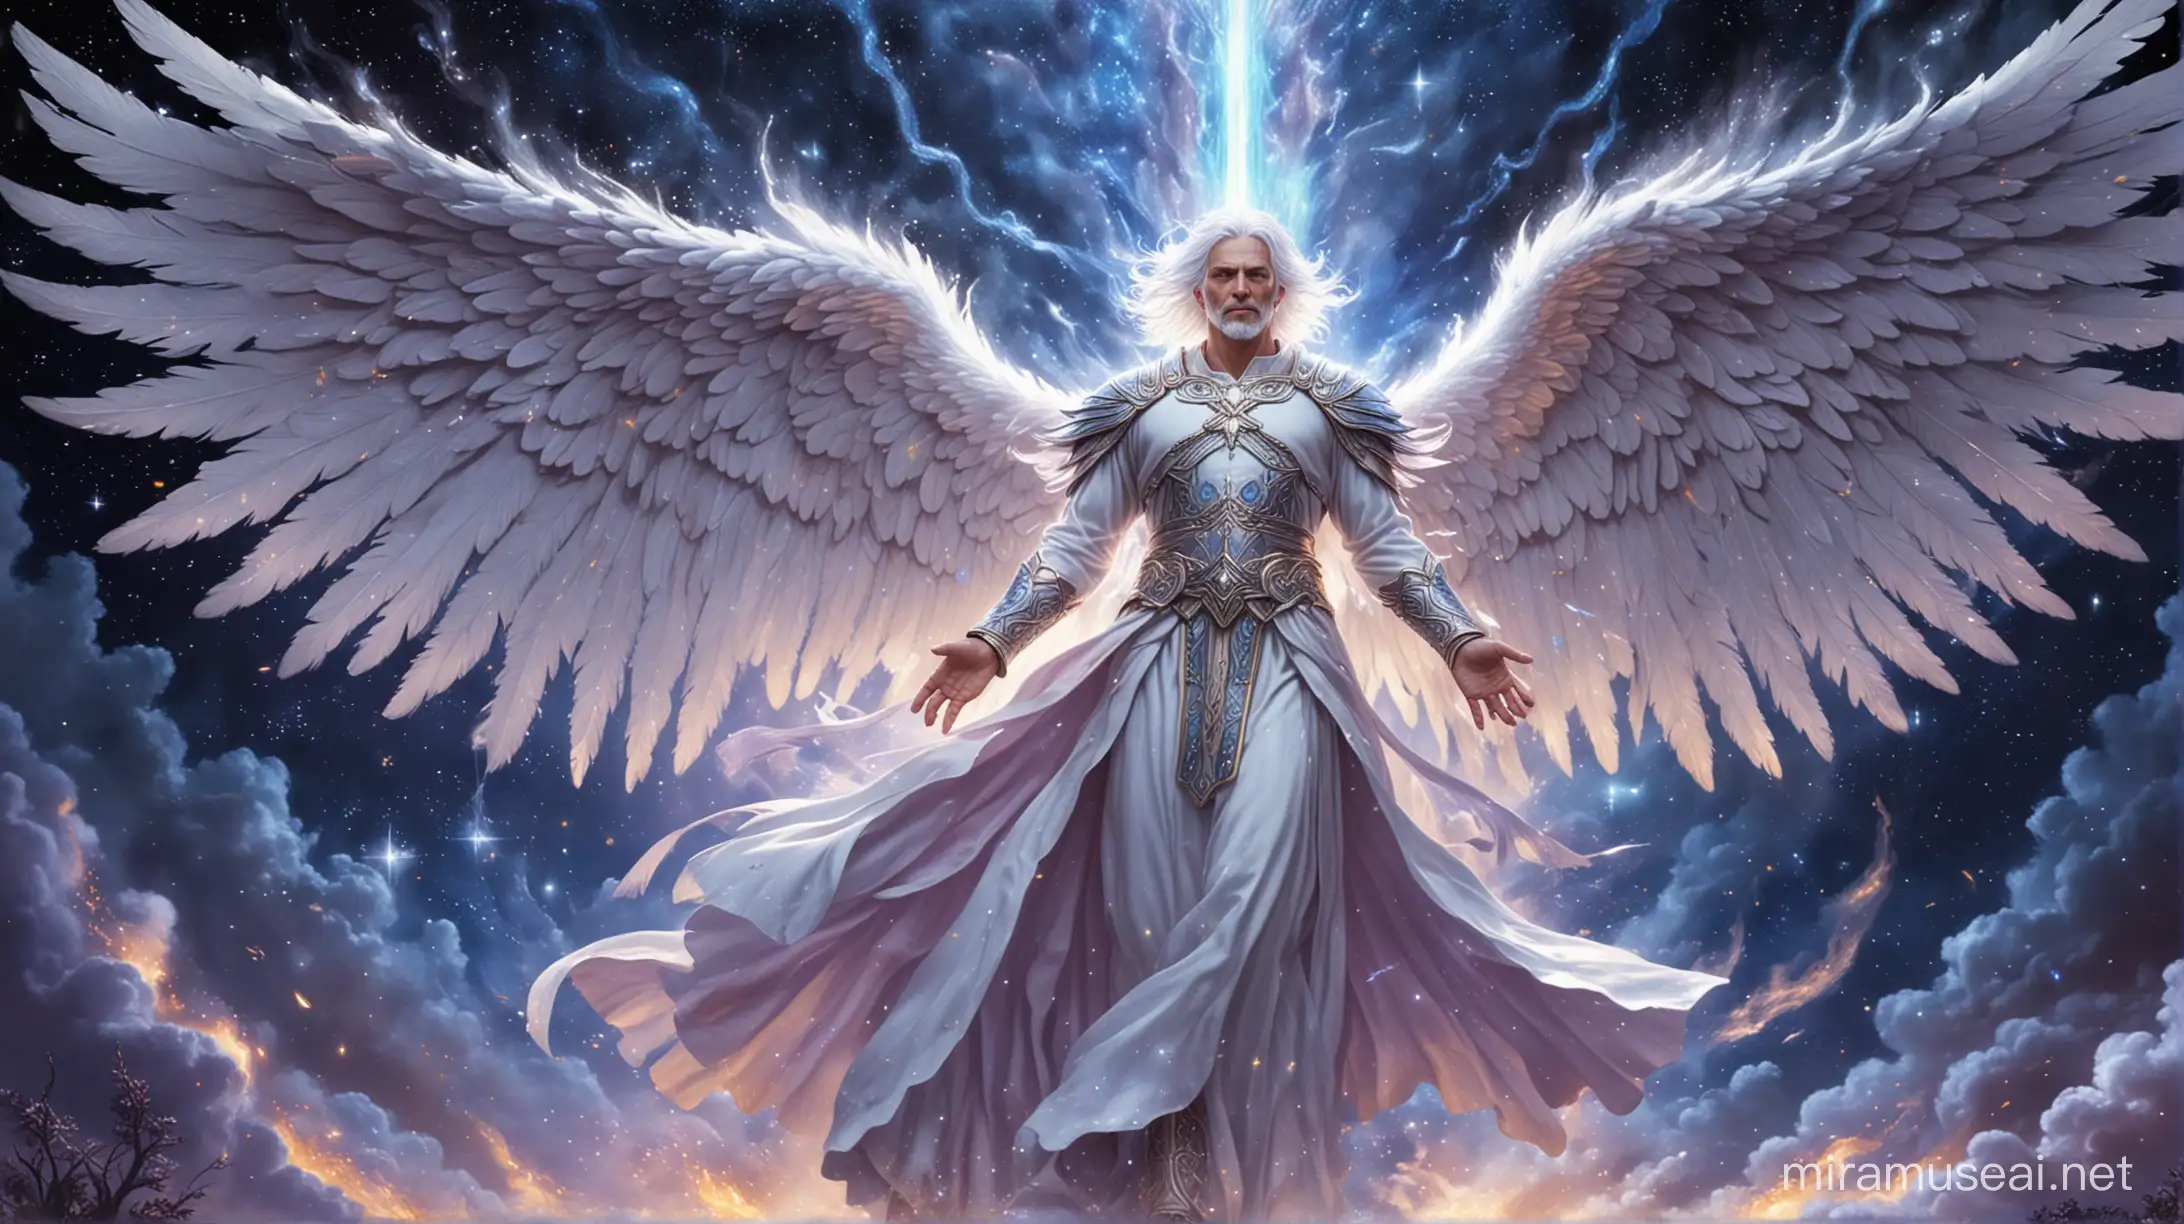 Powerful Guardian Angel with Burning Blue Flame Wings in Celestial Forest